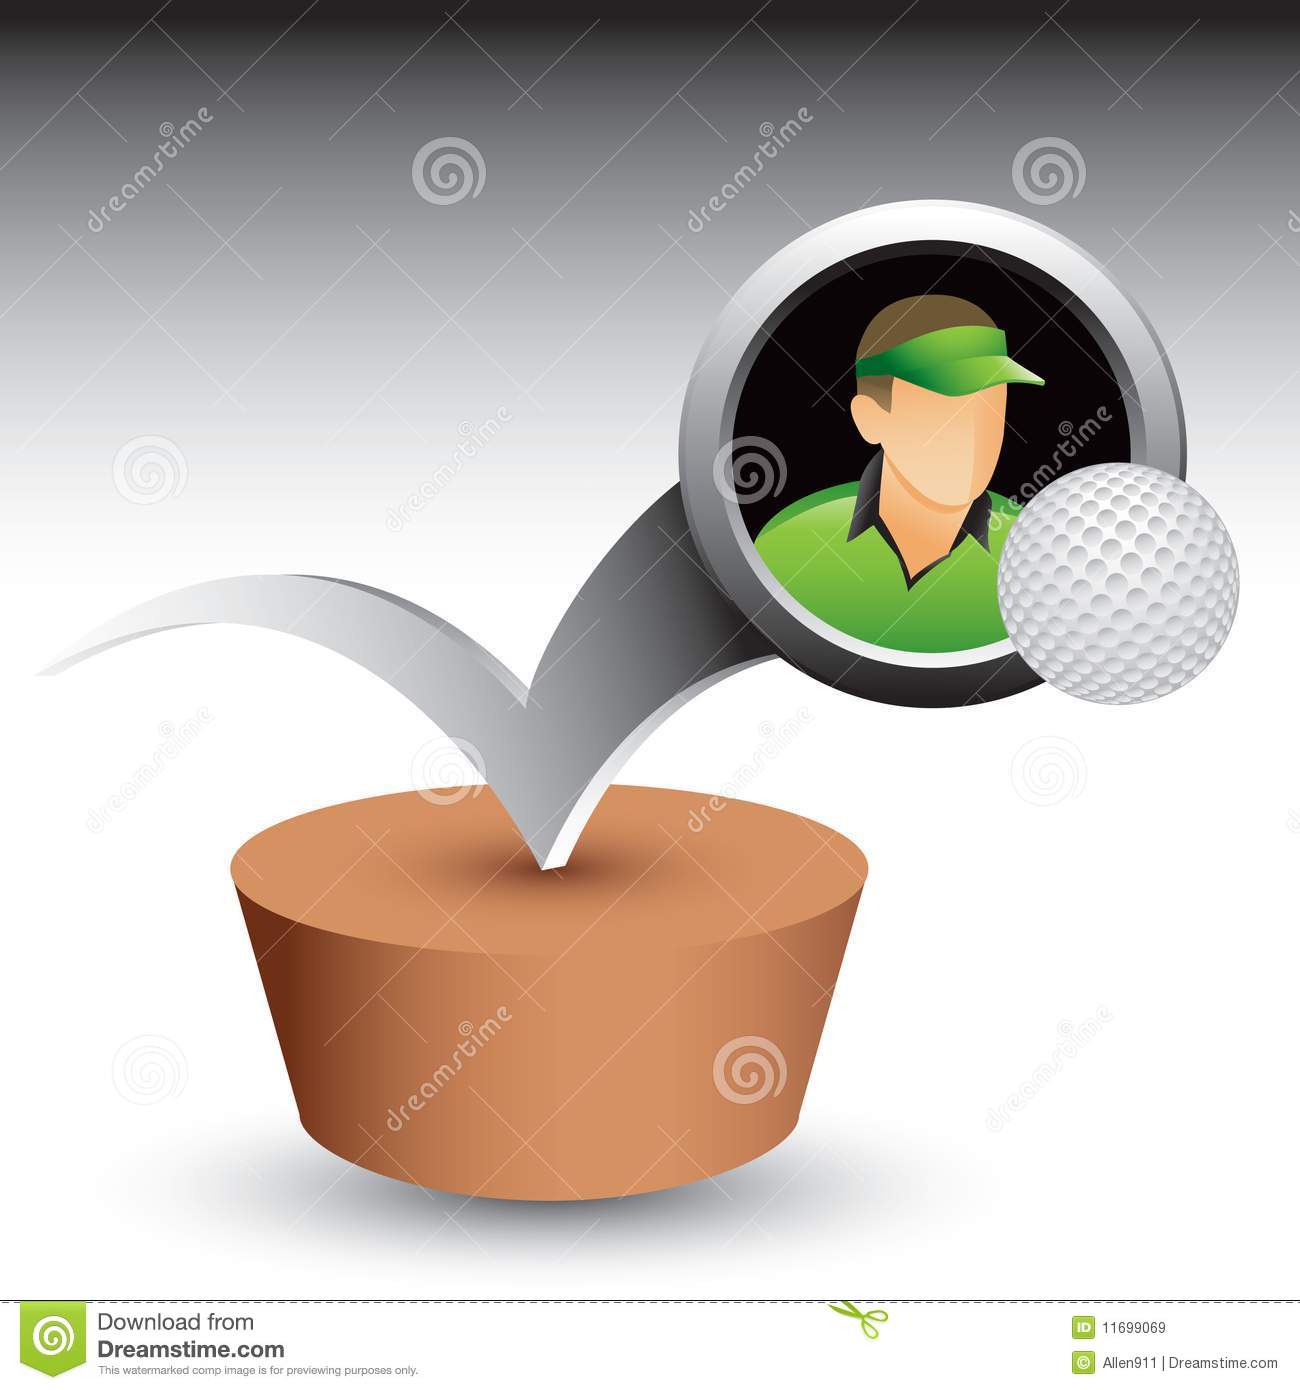 Golfer And Golf Ball Bouncing Royalty Free Stock Images   Image